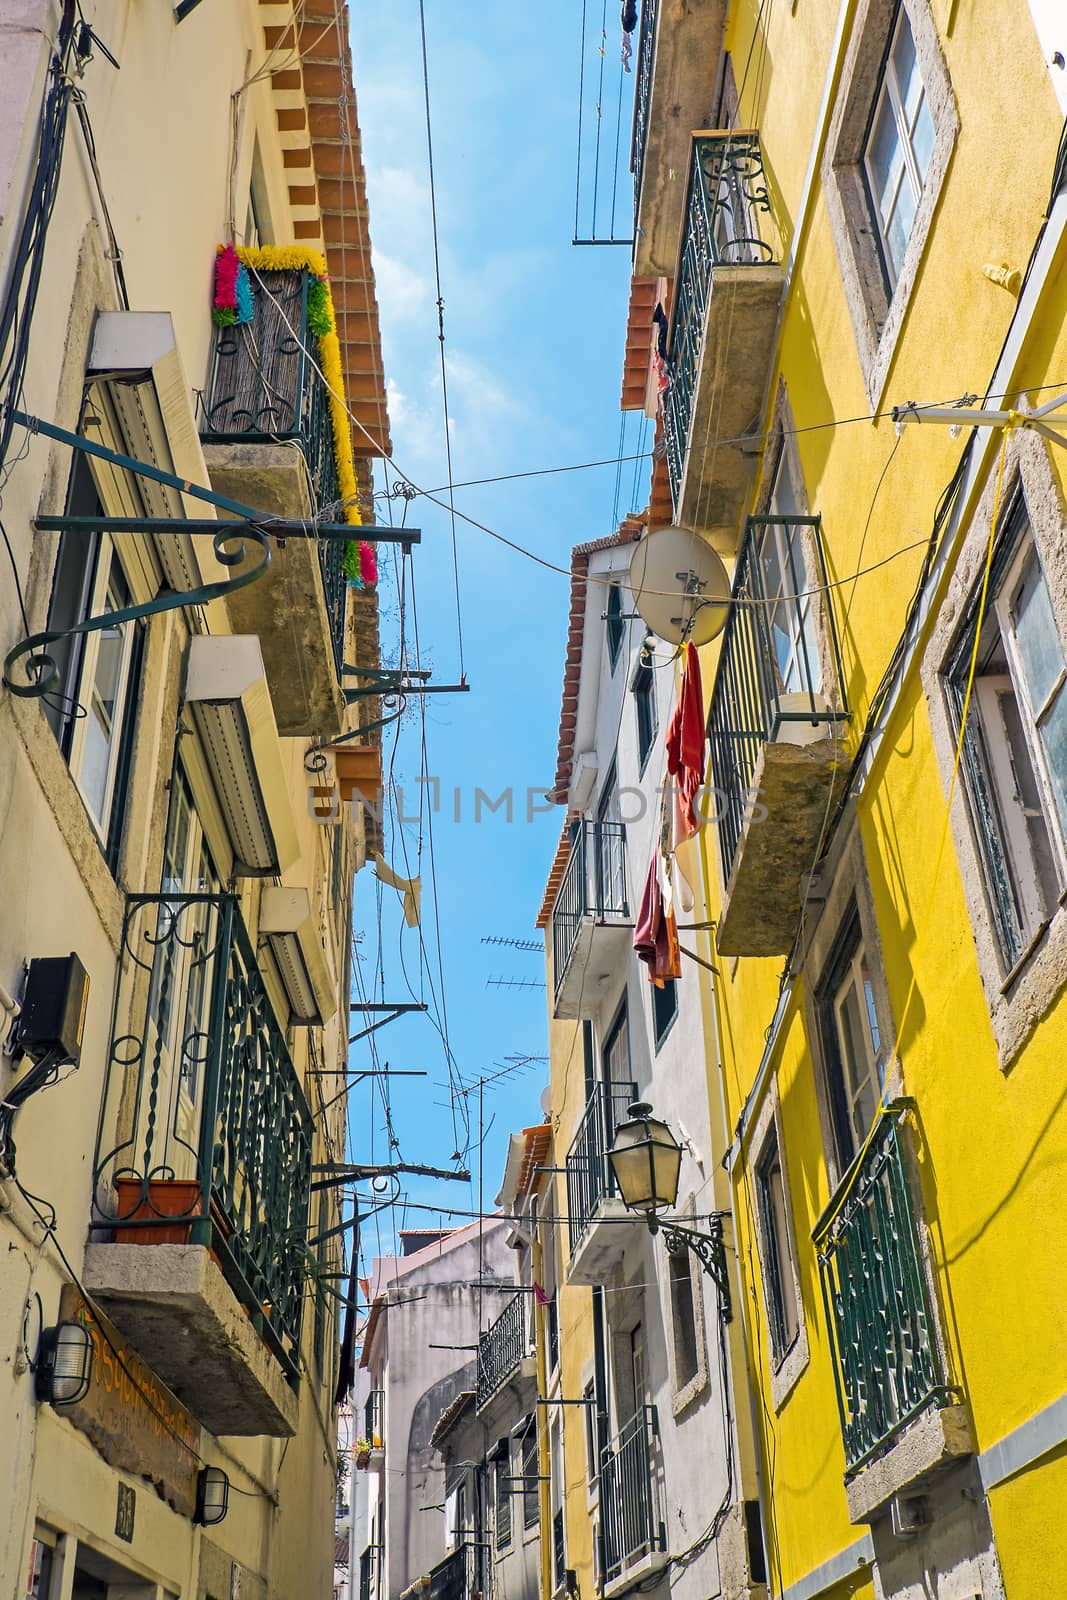 A small narrow street in the Alfama district in Lisbon, Portugal